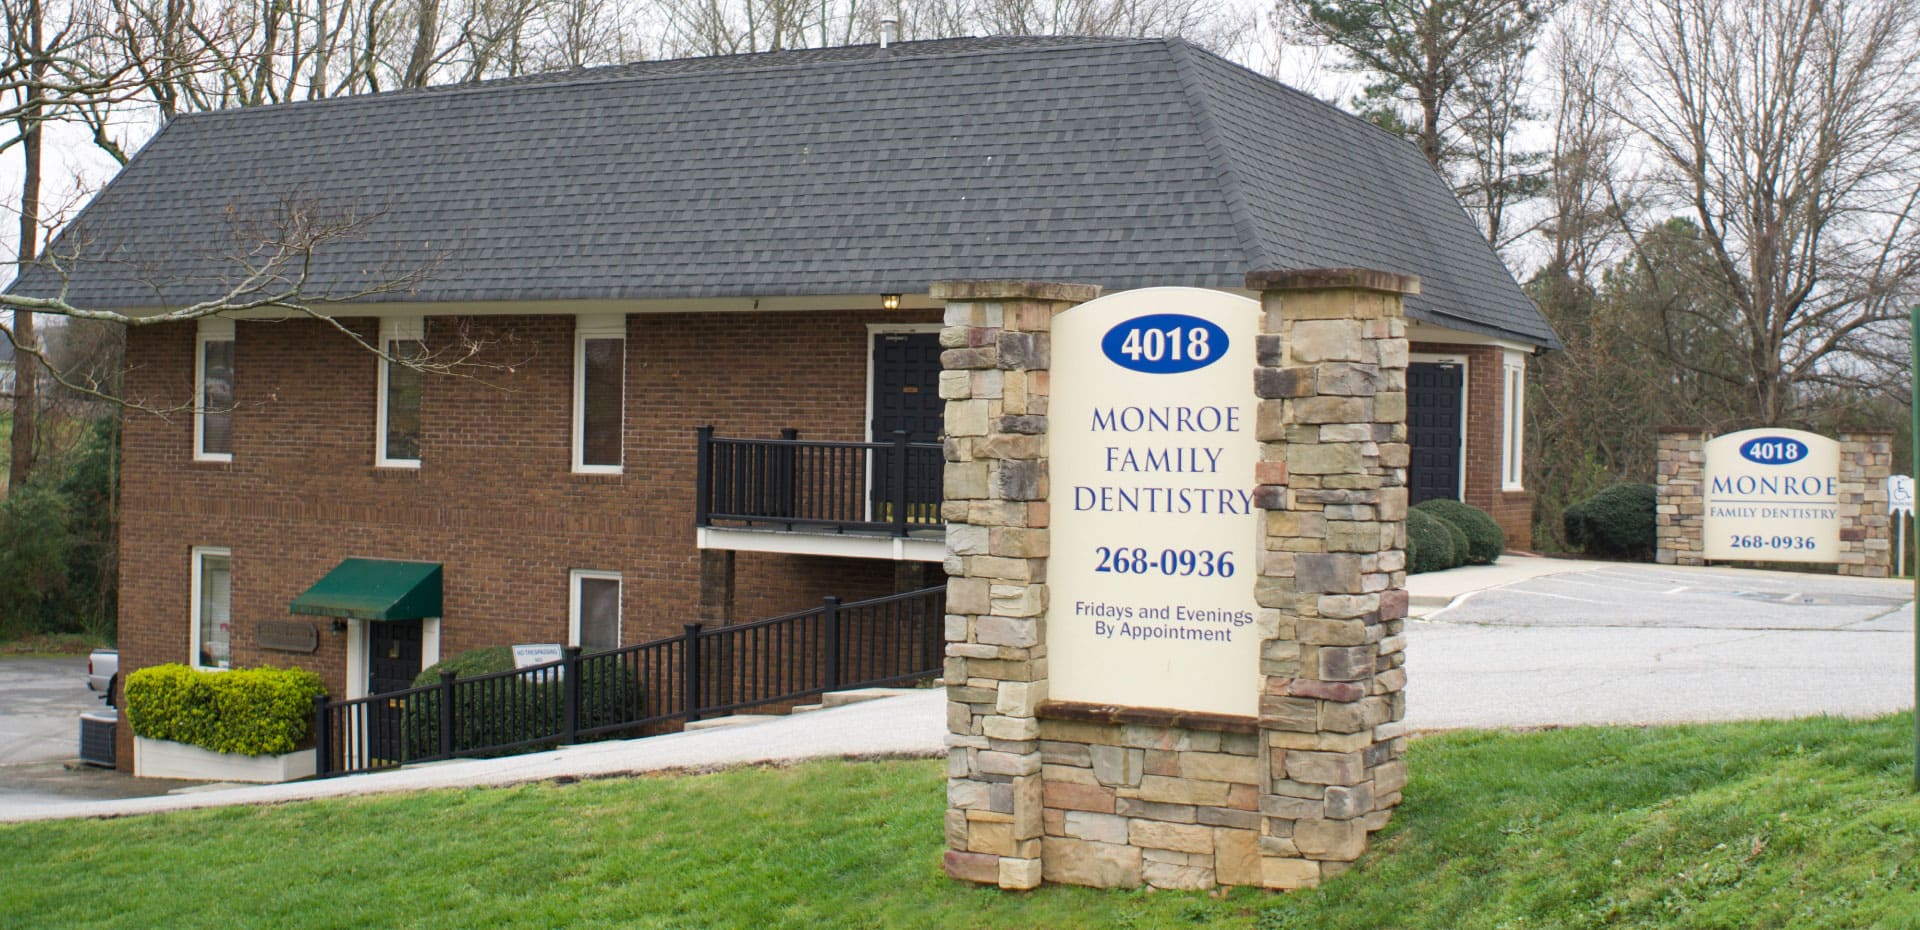 Monroe Family Dentistry brick building exterior with 2 signs out front